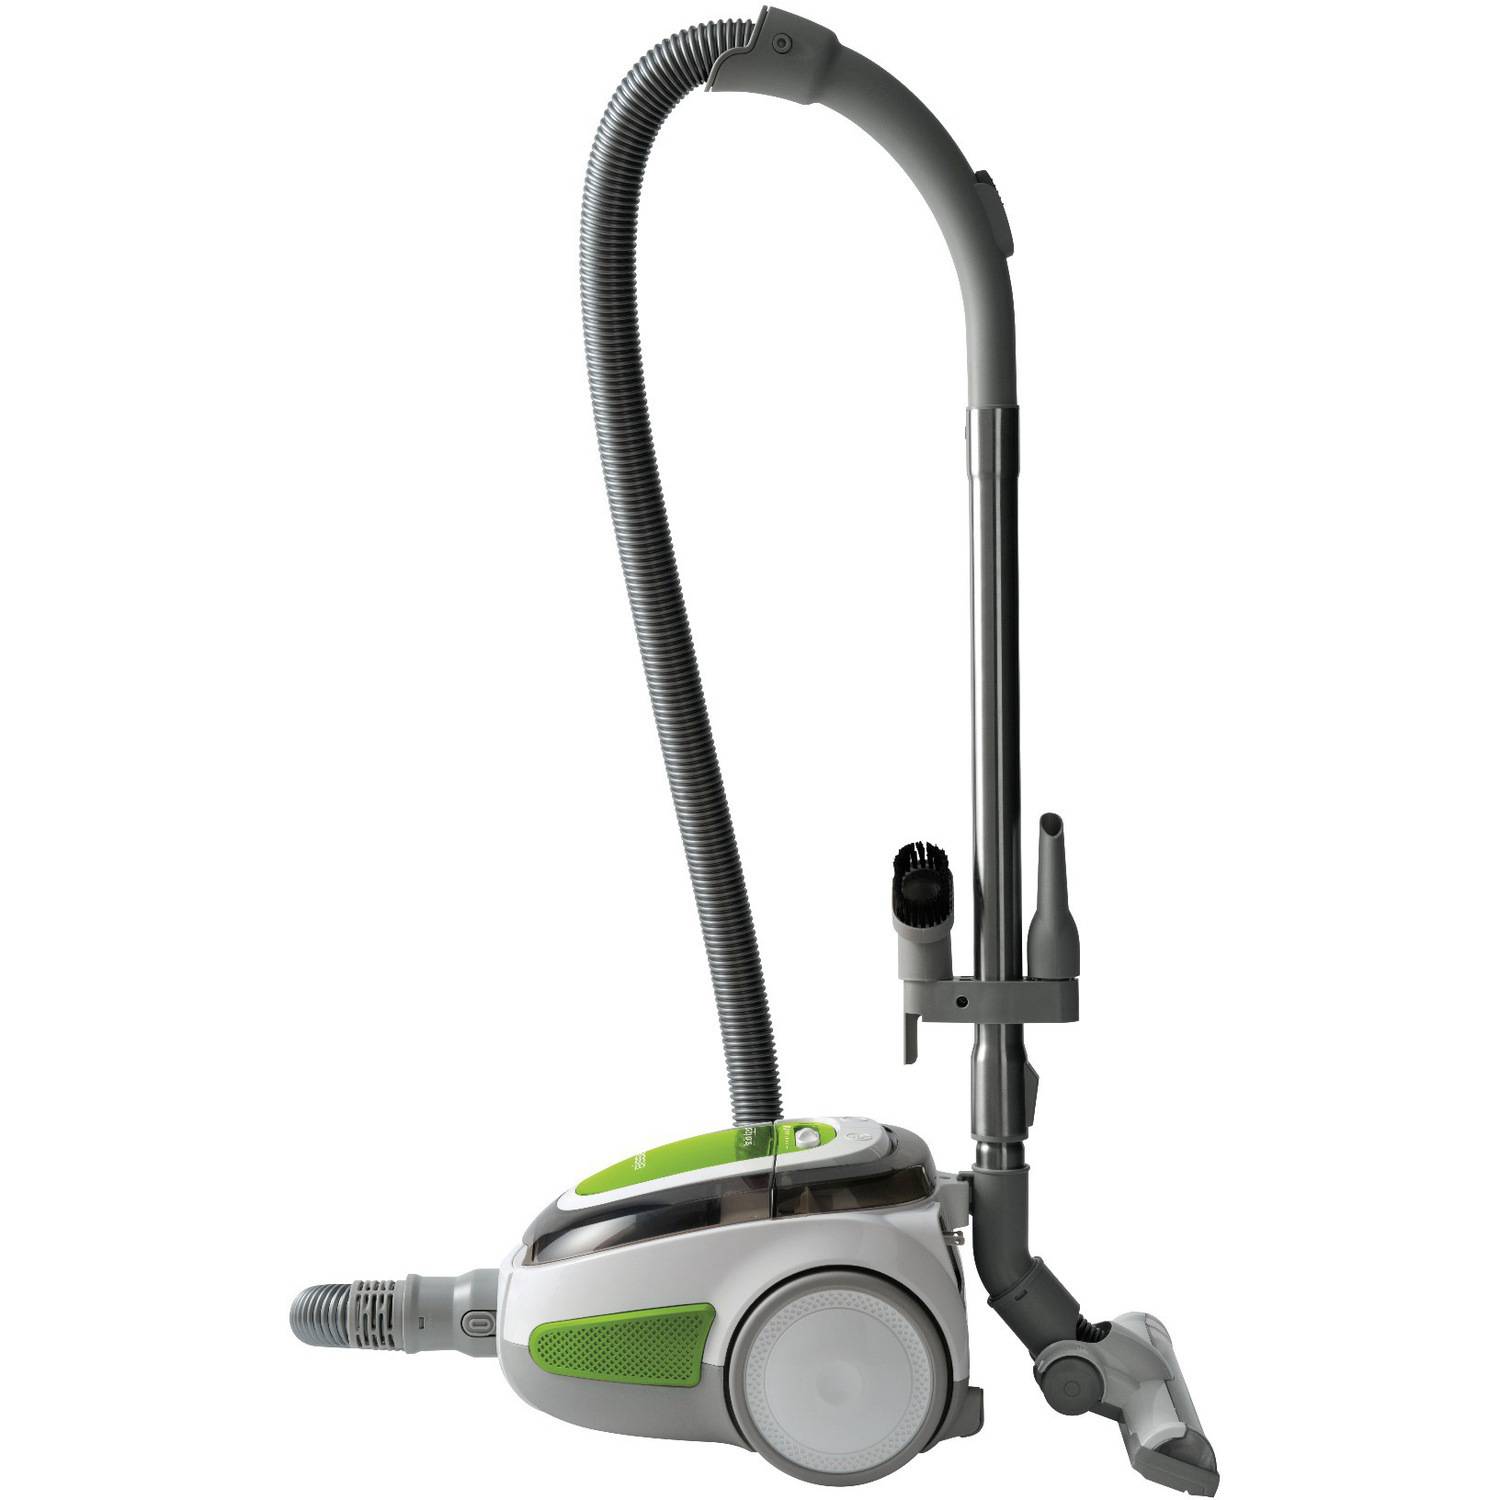 Bissell Hard Floor Expert Canister Vacuum - 1154W in Silver and Green - image 3 of 10